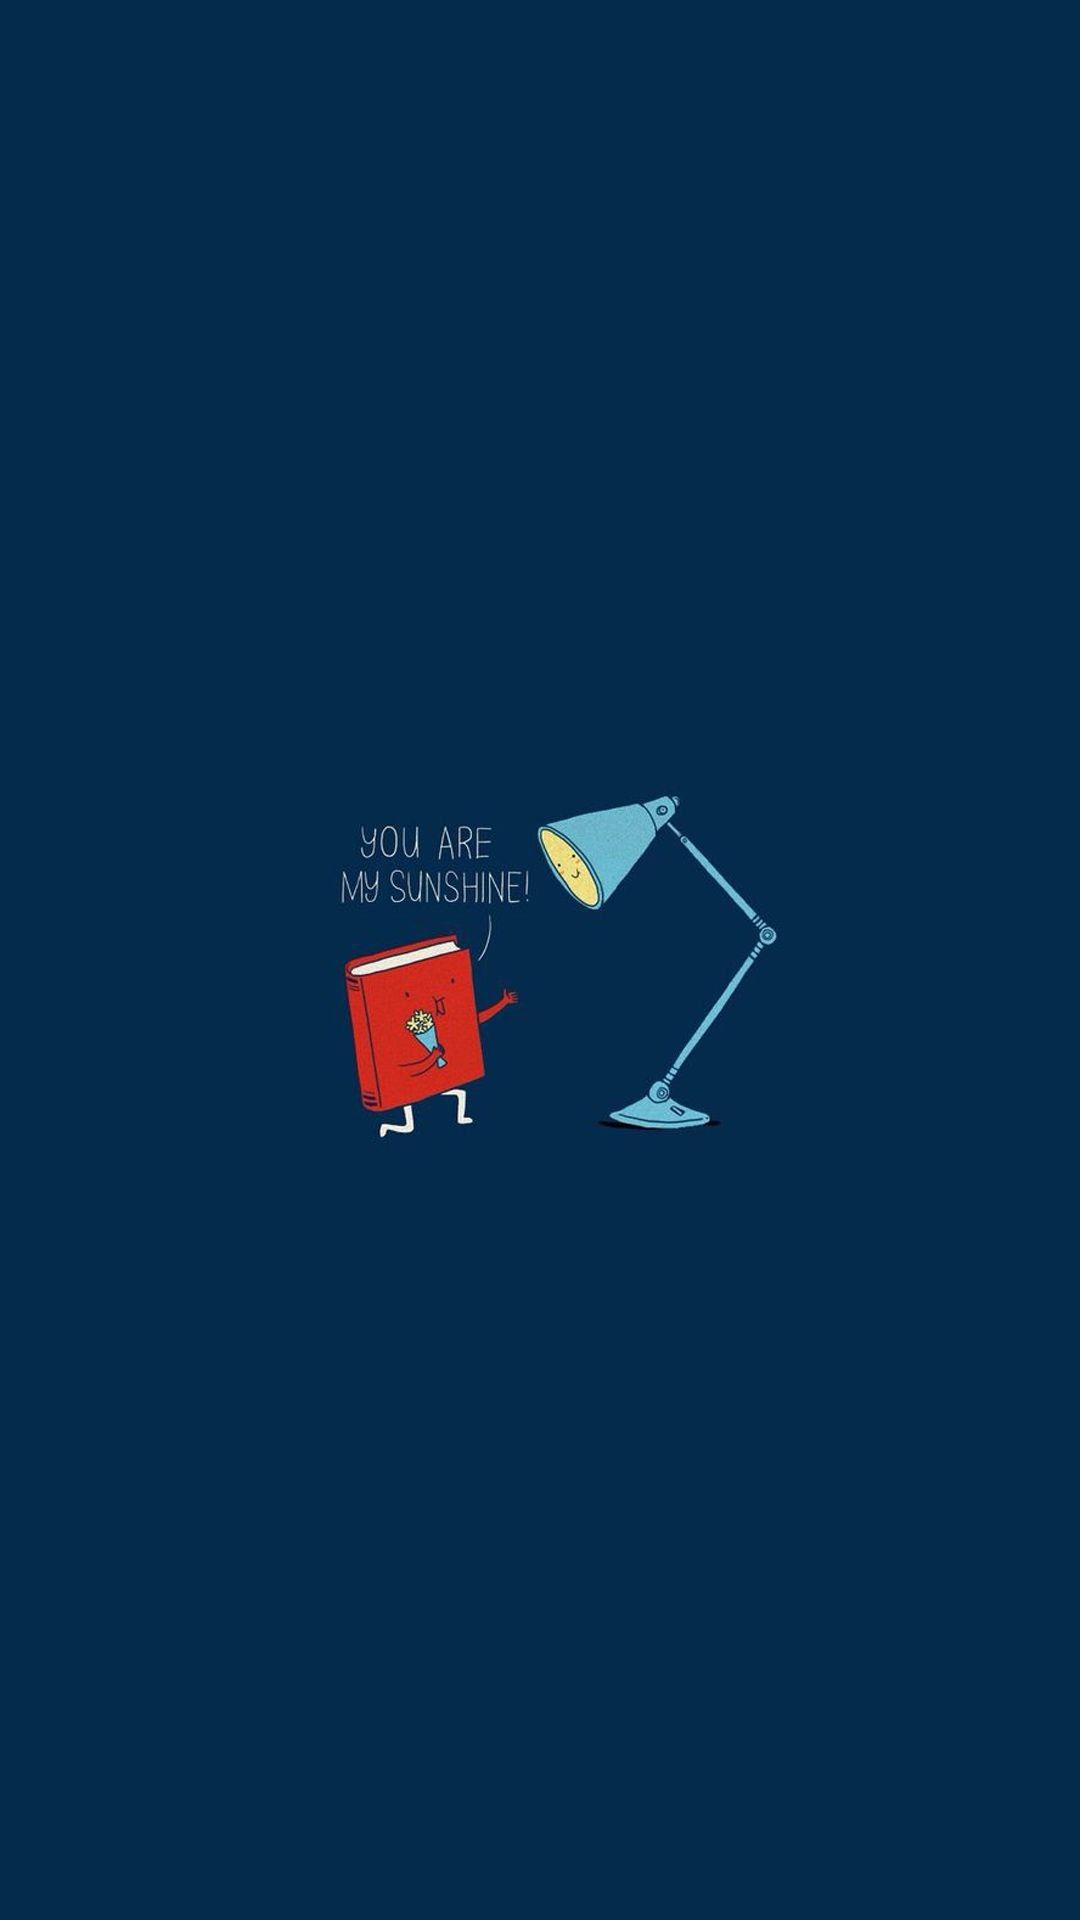 The lamp and red box on a blue background - Cool